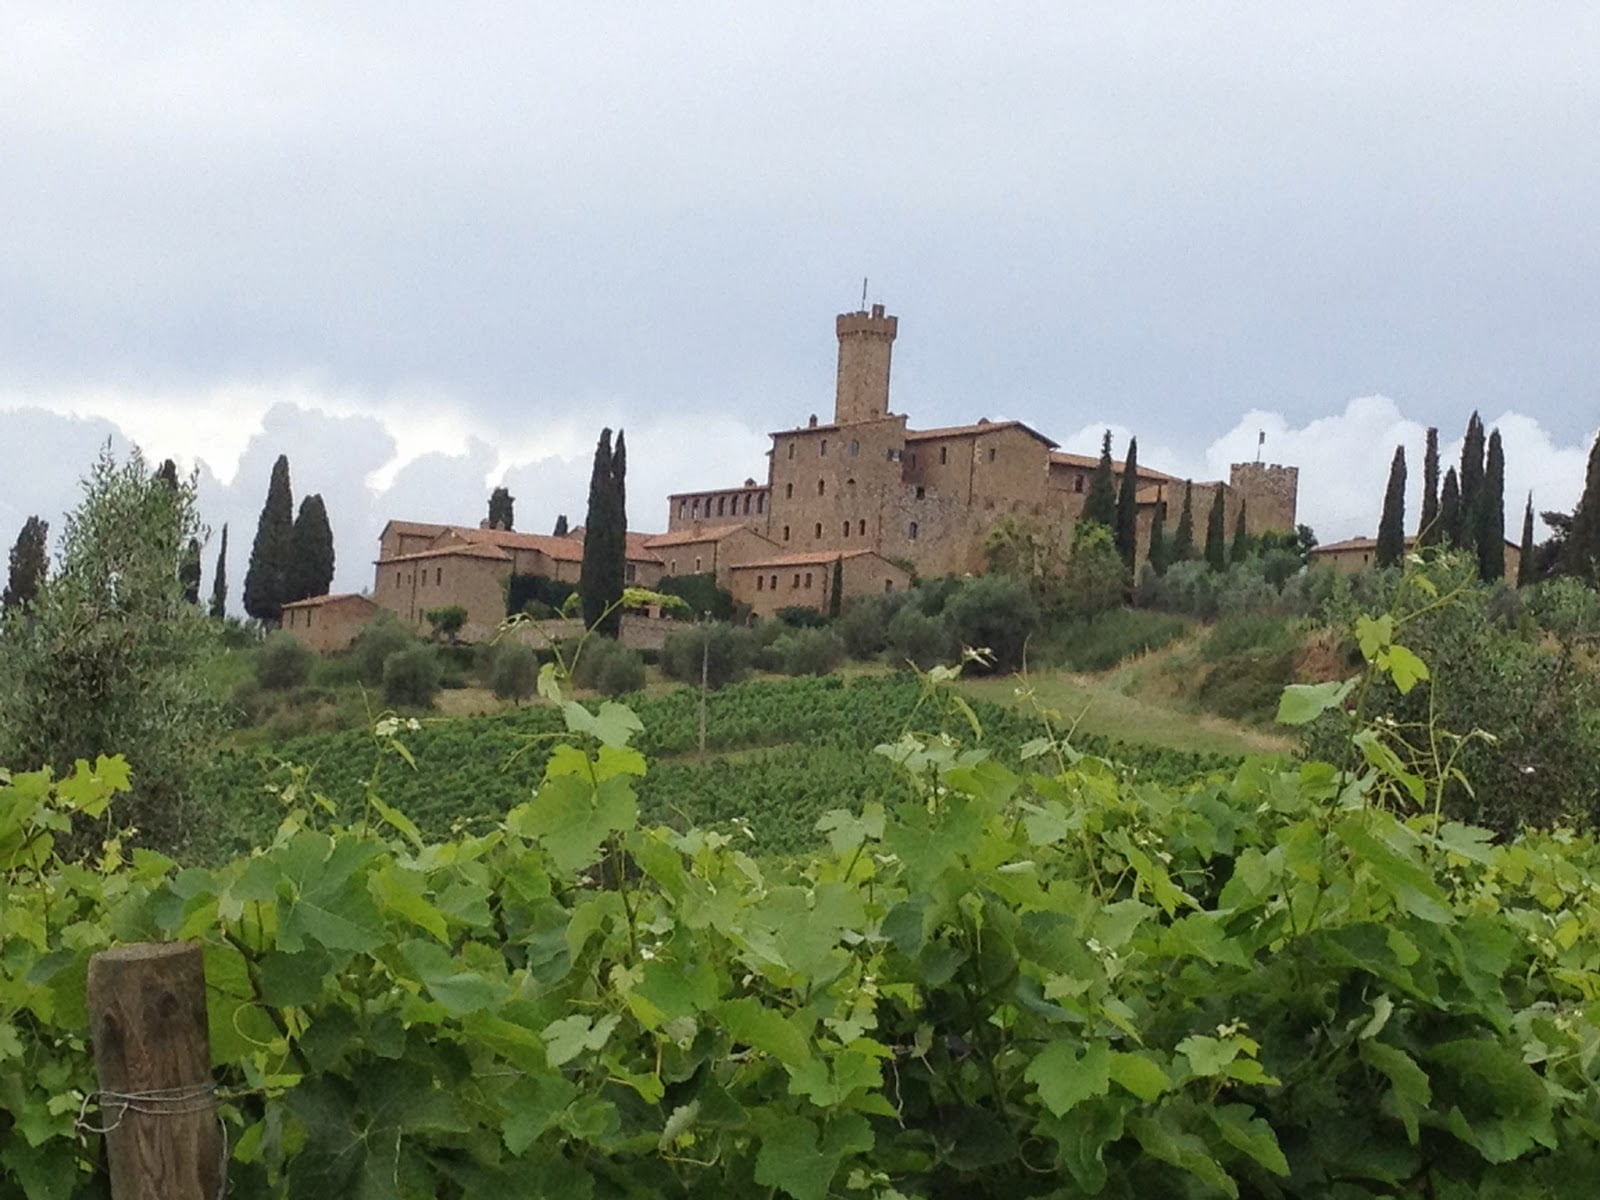 Castello Banfi castle in Montalcino, Tuscany, Italy, viewed from the vineyards